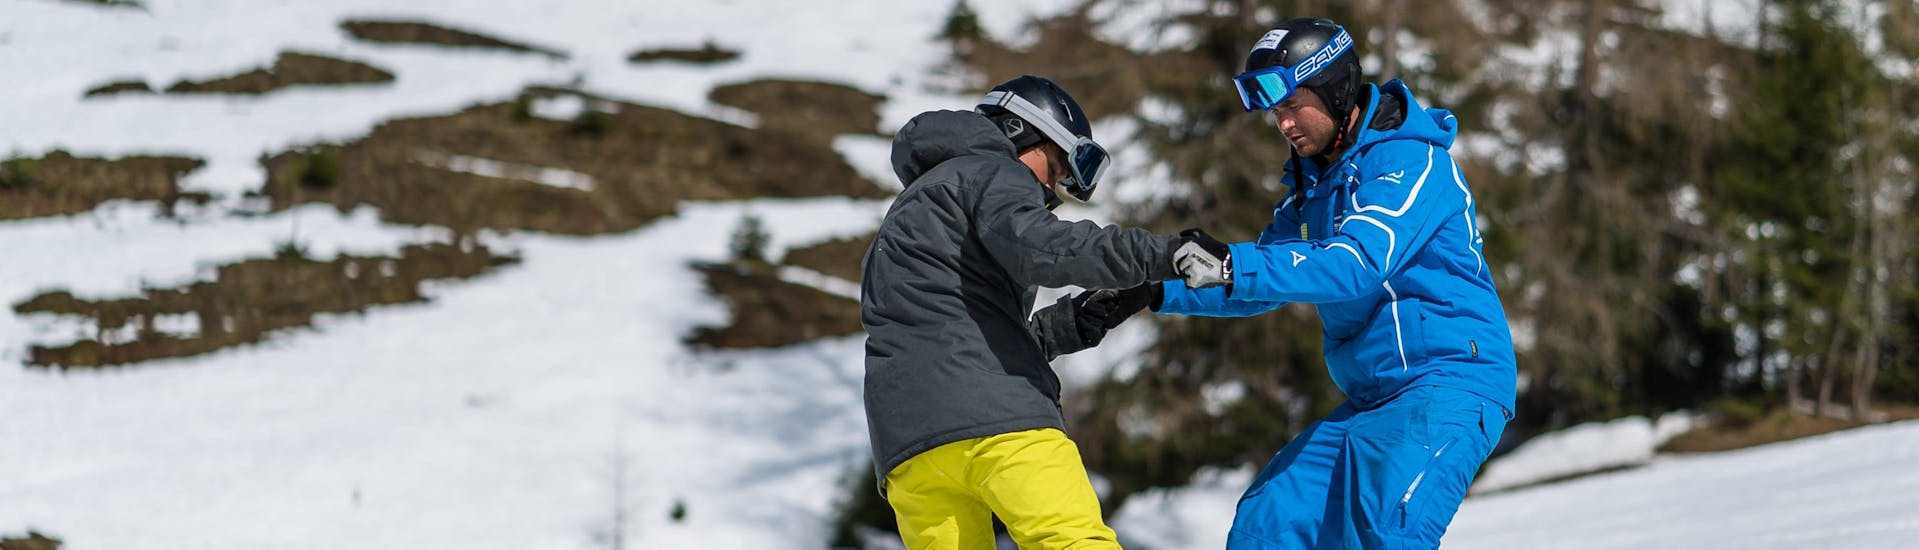 Adult Snowboarding Lessons for All Levels.